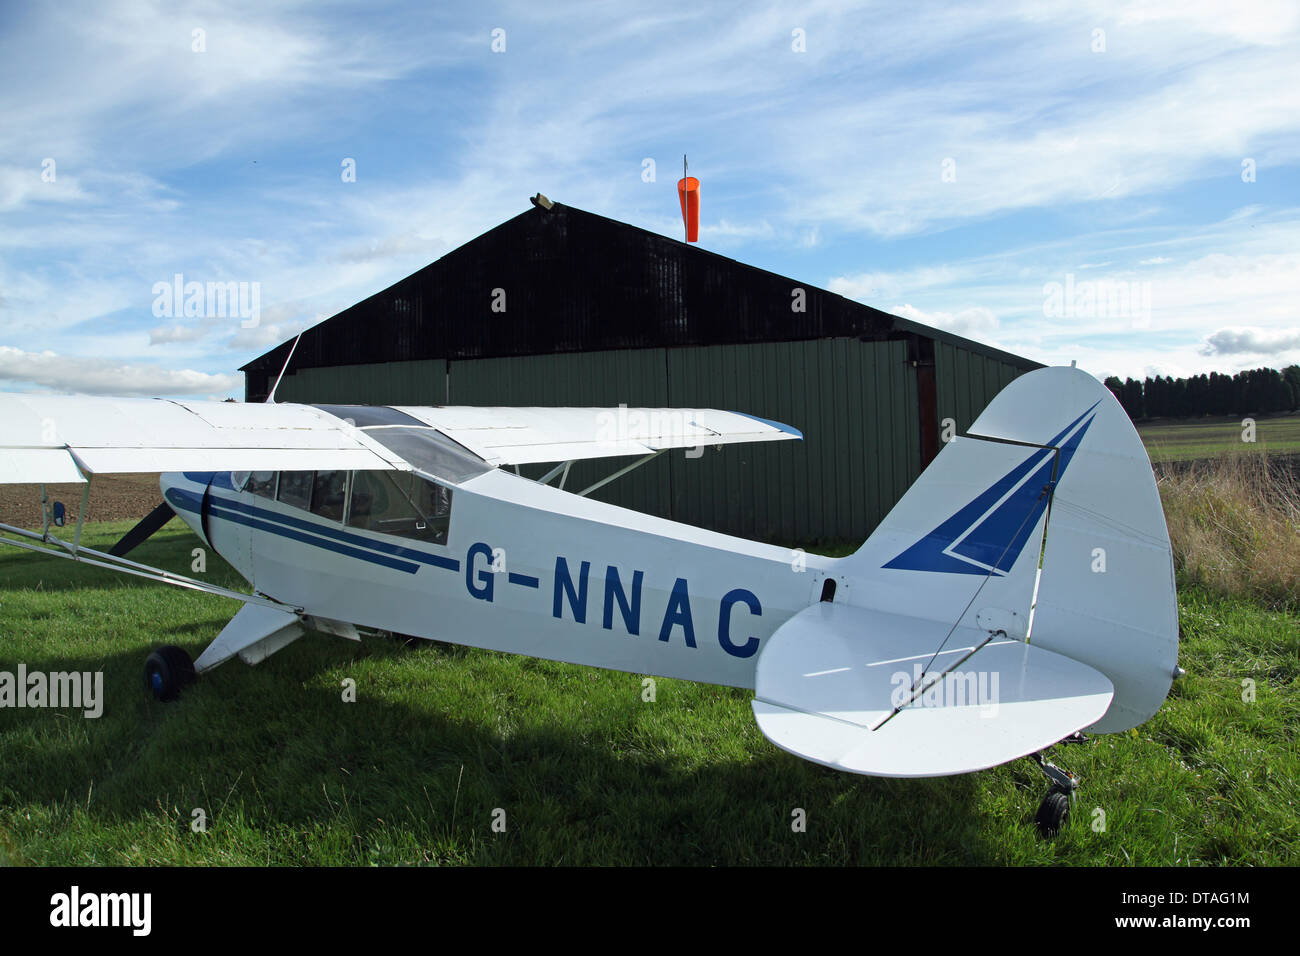 a Piper PA18 Super Cub light aircraft parked outside a hangar with windsock Stock Photo